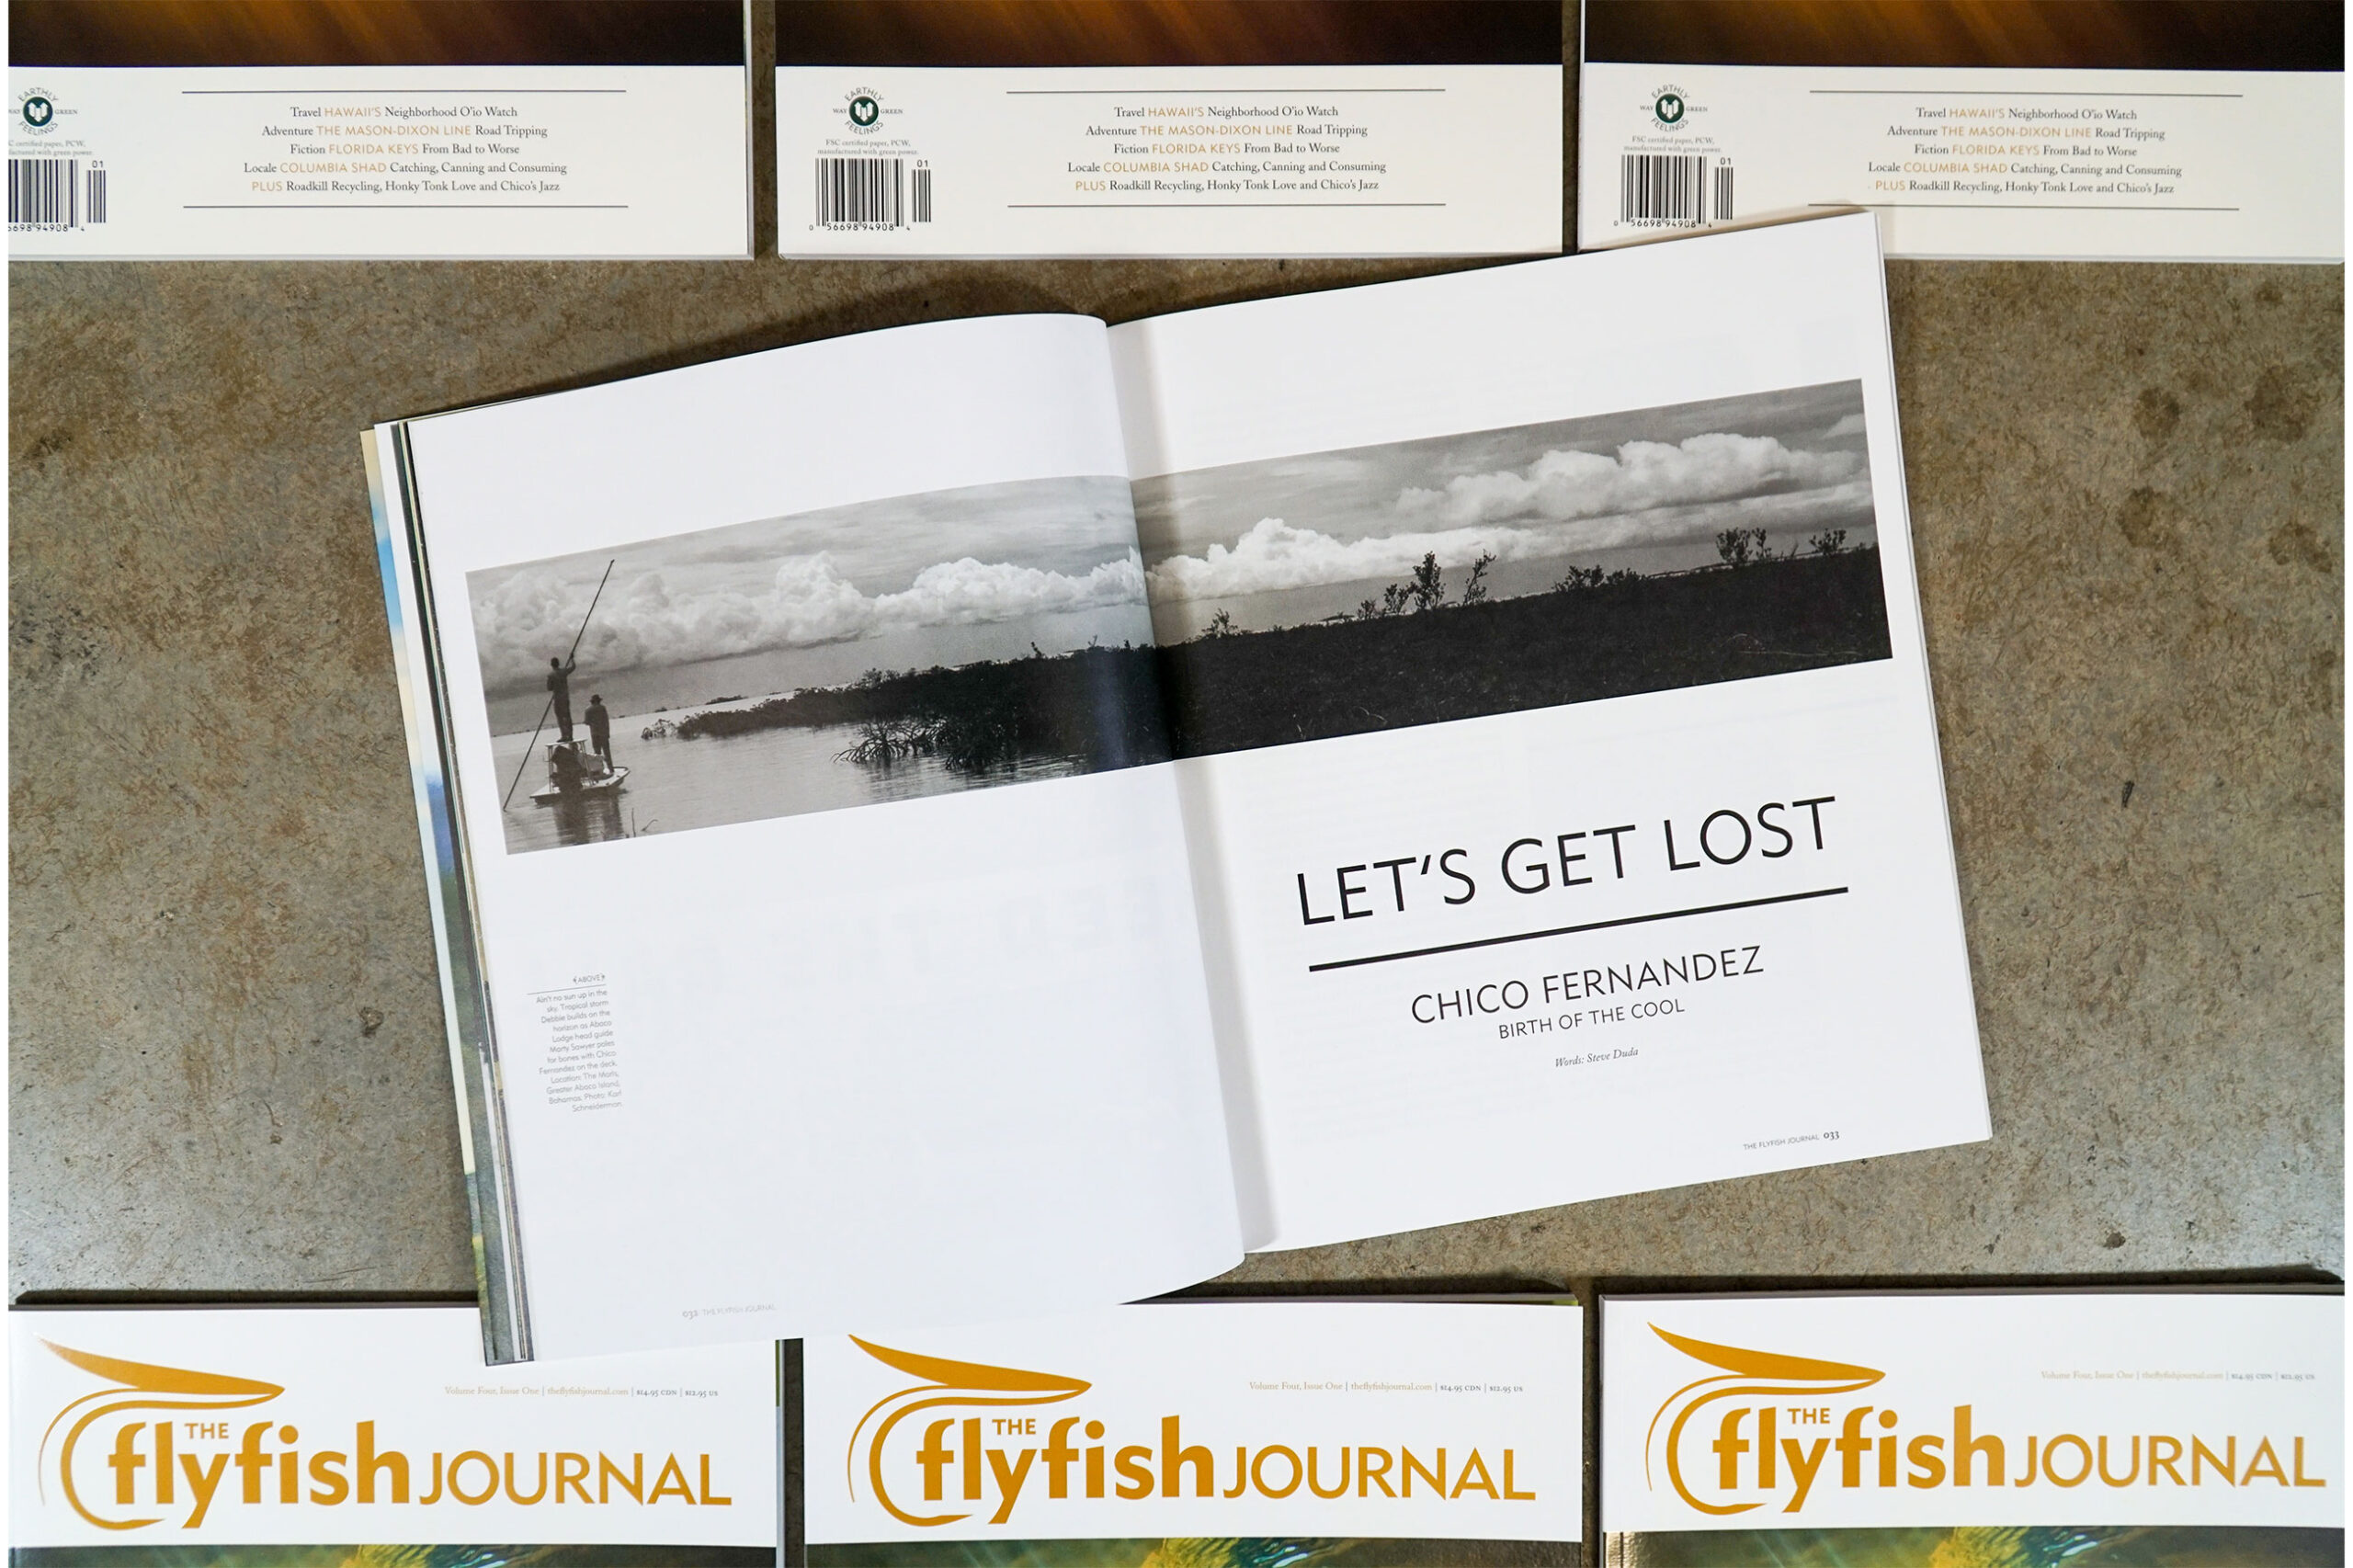 The Flyfish Journal Volume 4 Issue 1 Feature Let's Get Lost